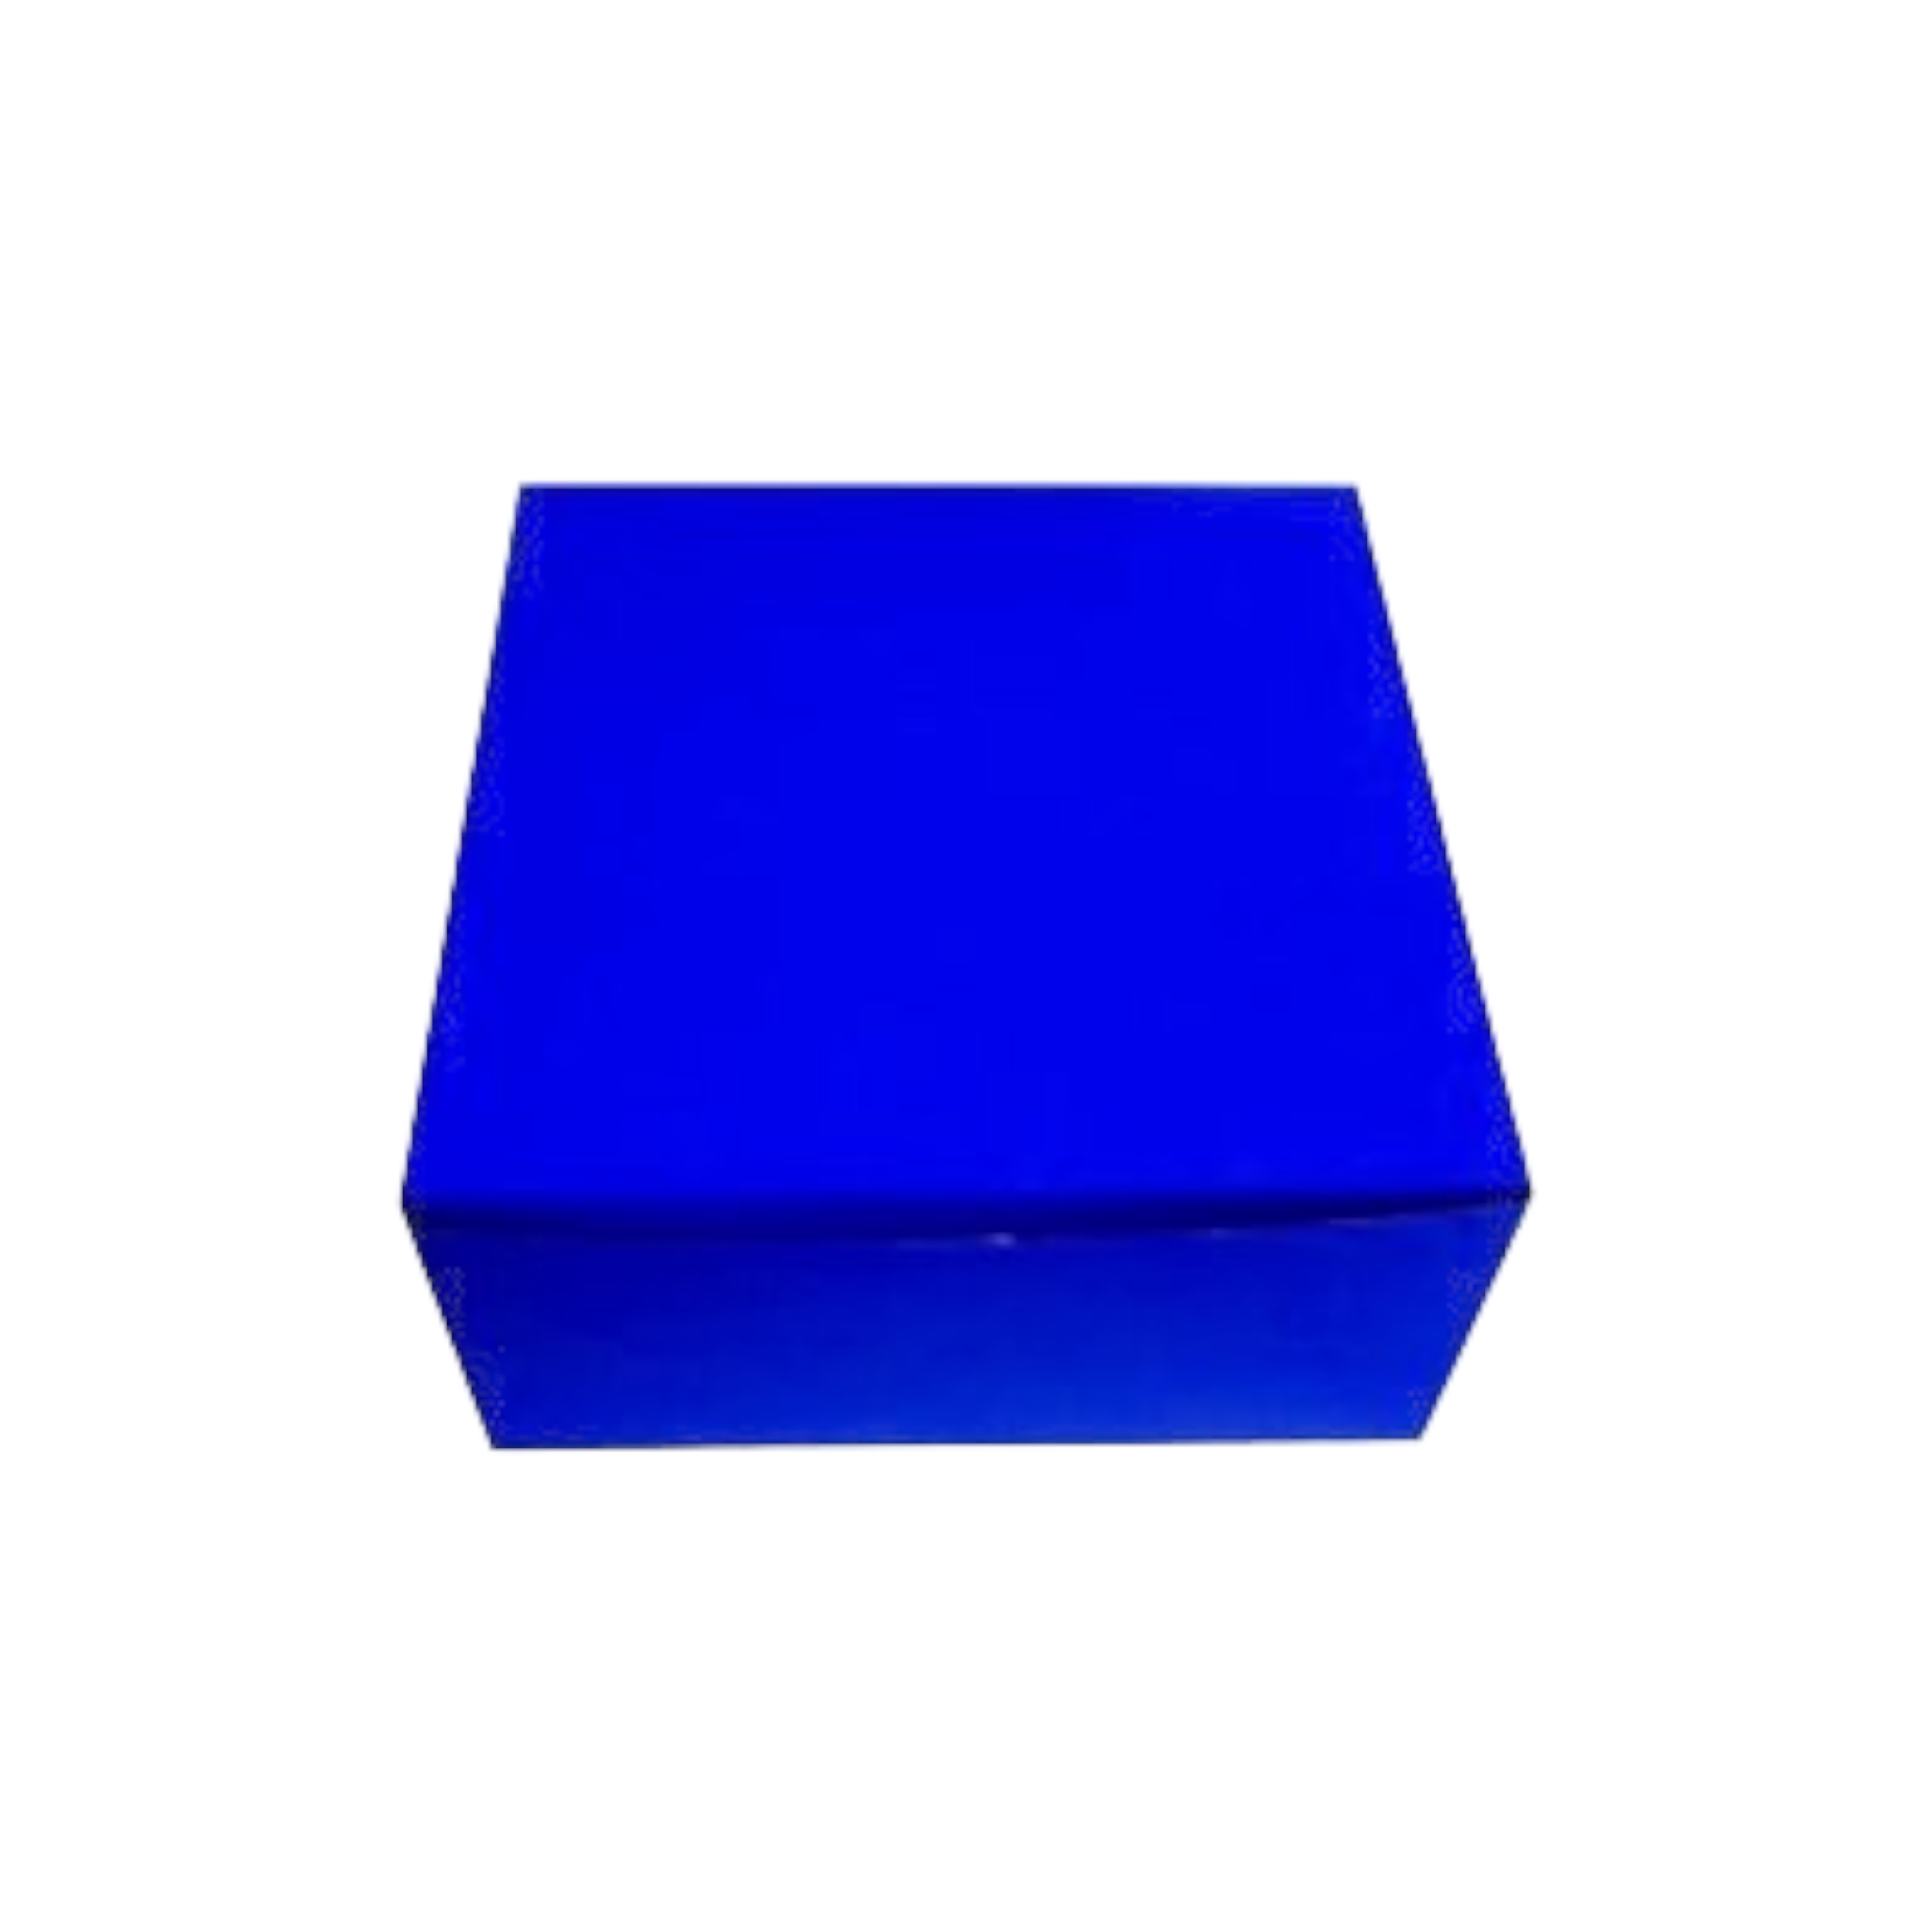 Gift Color Party Box 6x6x3inch Square